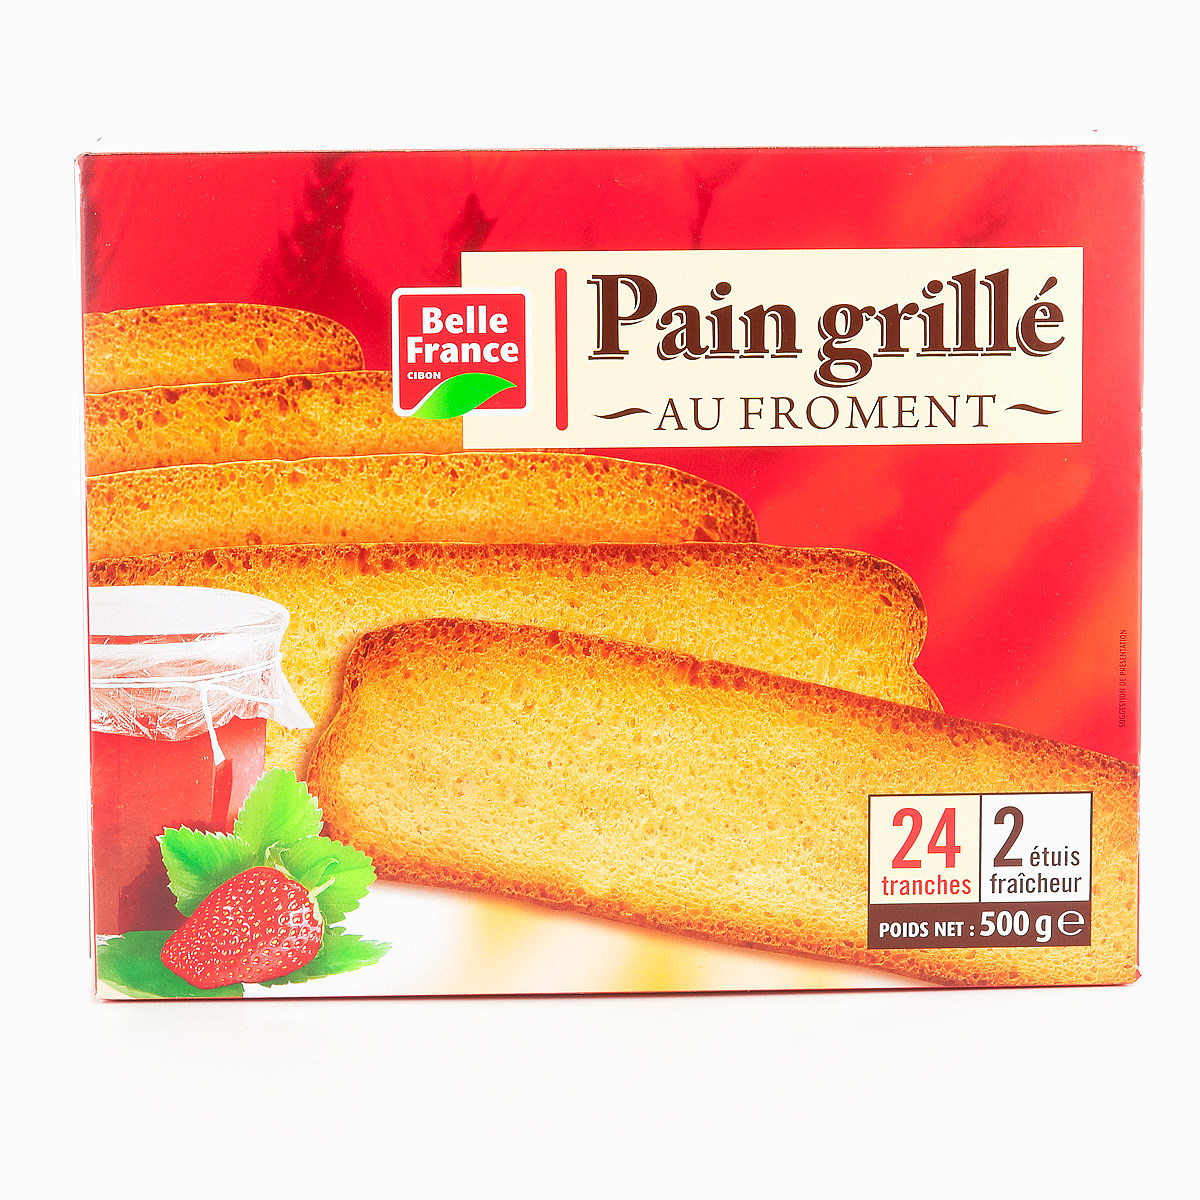 PAIN GRILLE 24TR. 500G.BF